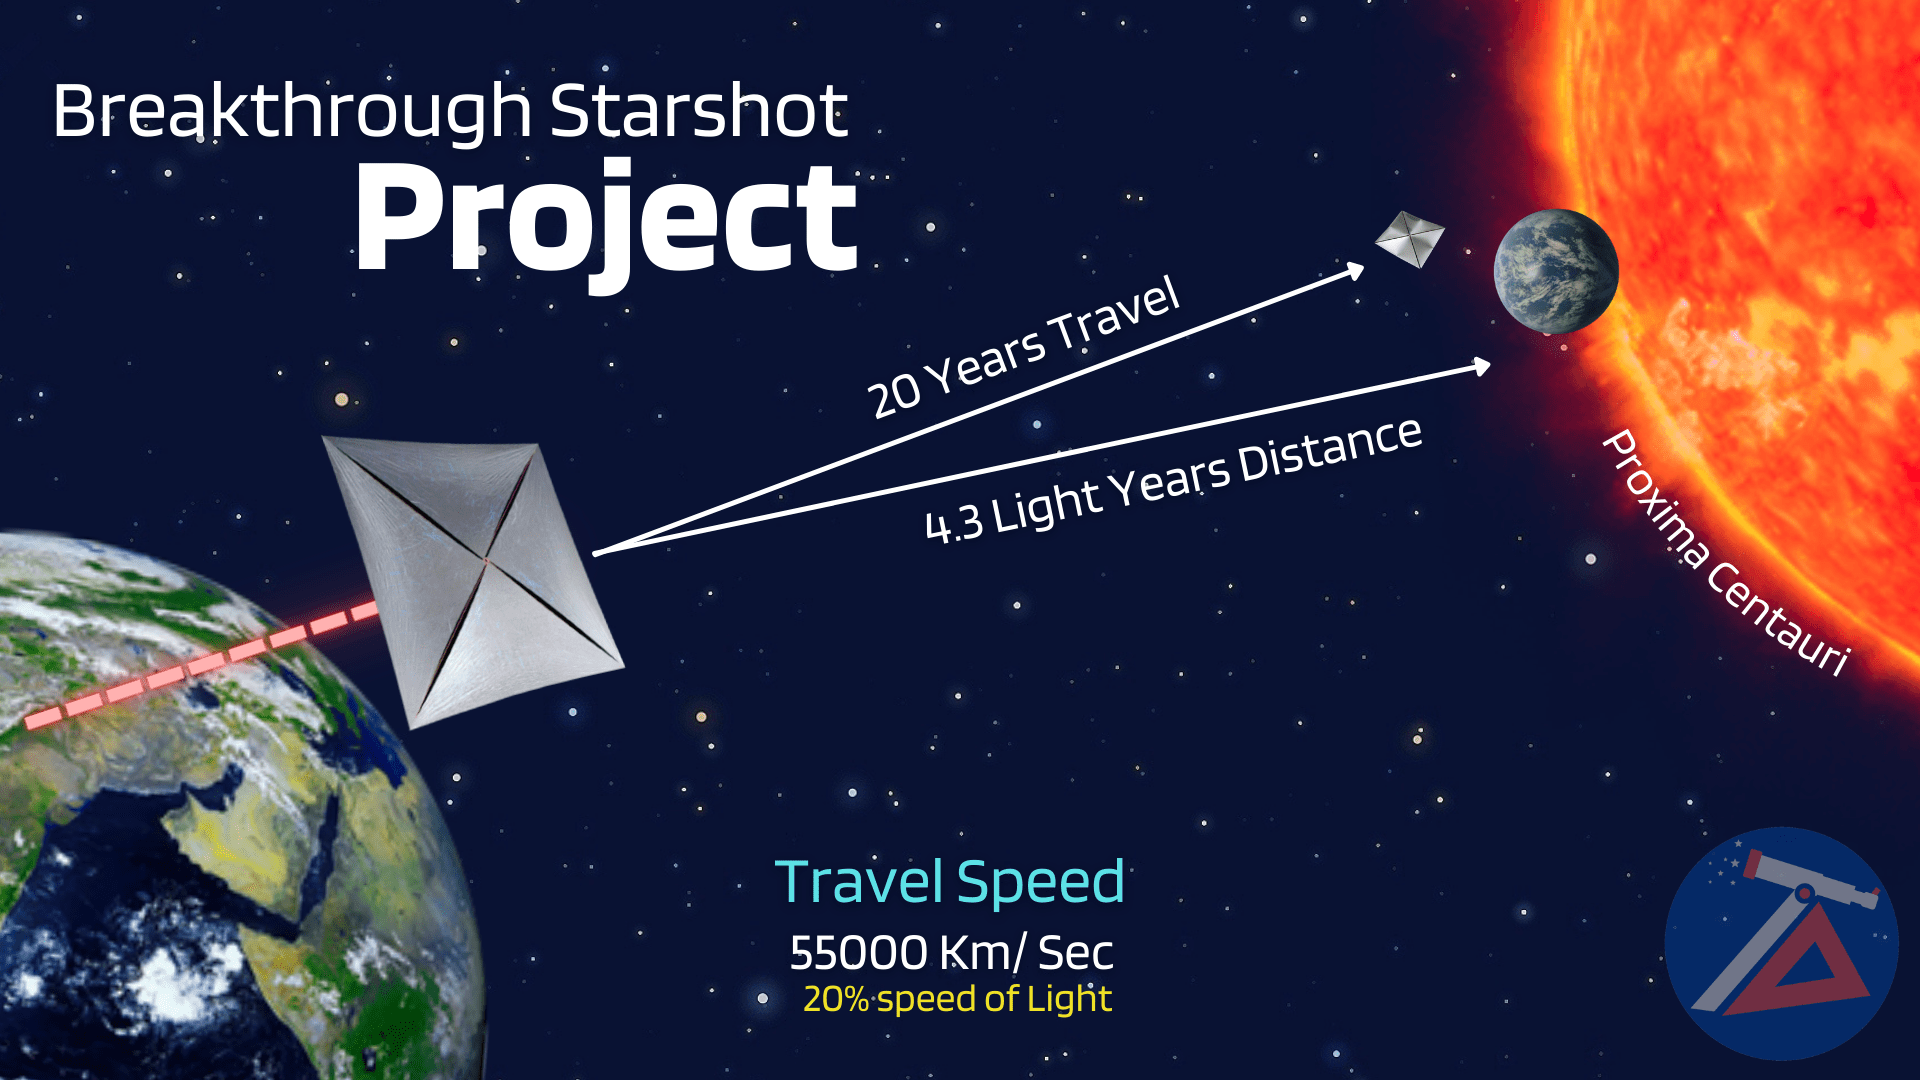 The Project Breakthrough Starshot